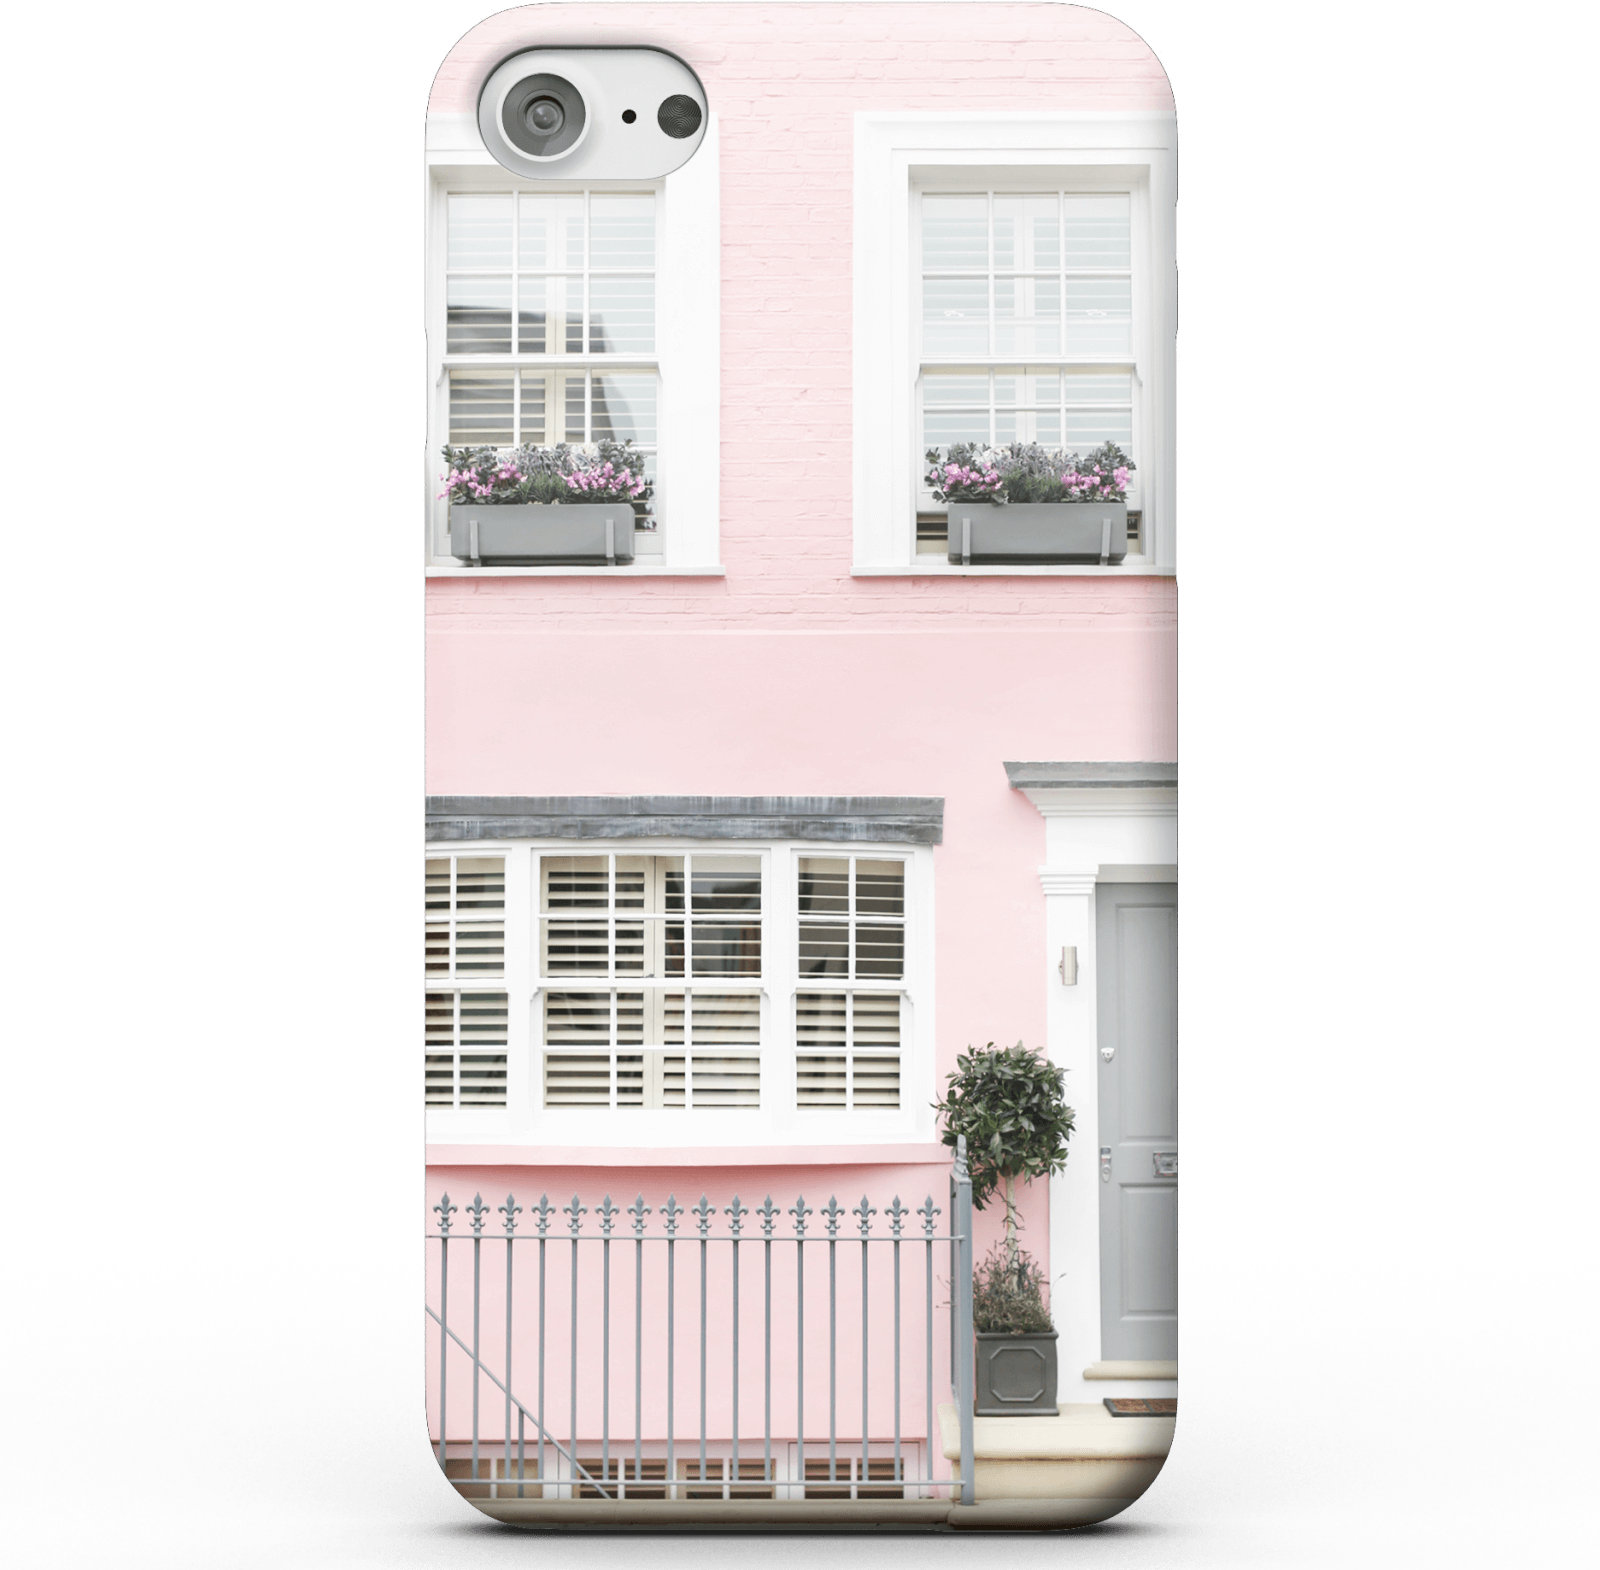 Pastel Pink Phone Case for iPhone and Android - iPhone 5/5s - Snap Case - Matte